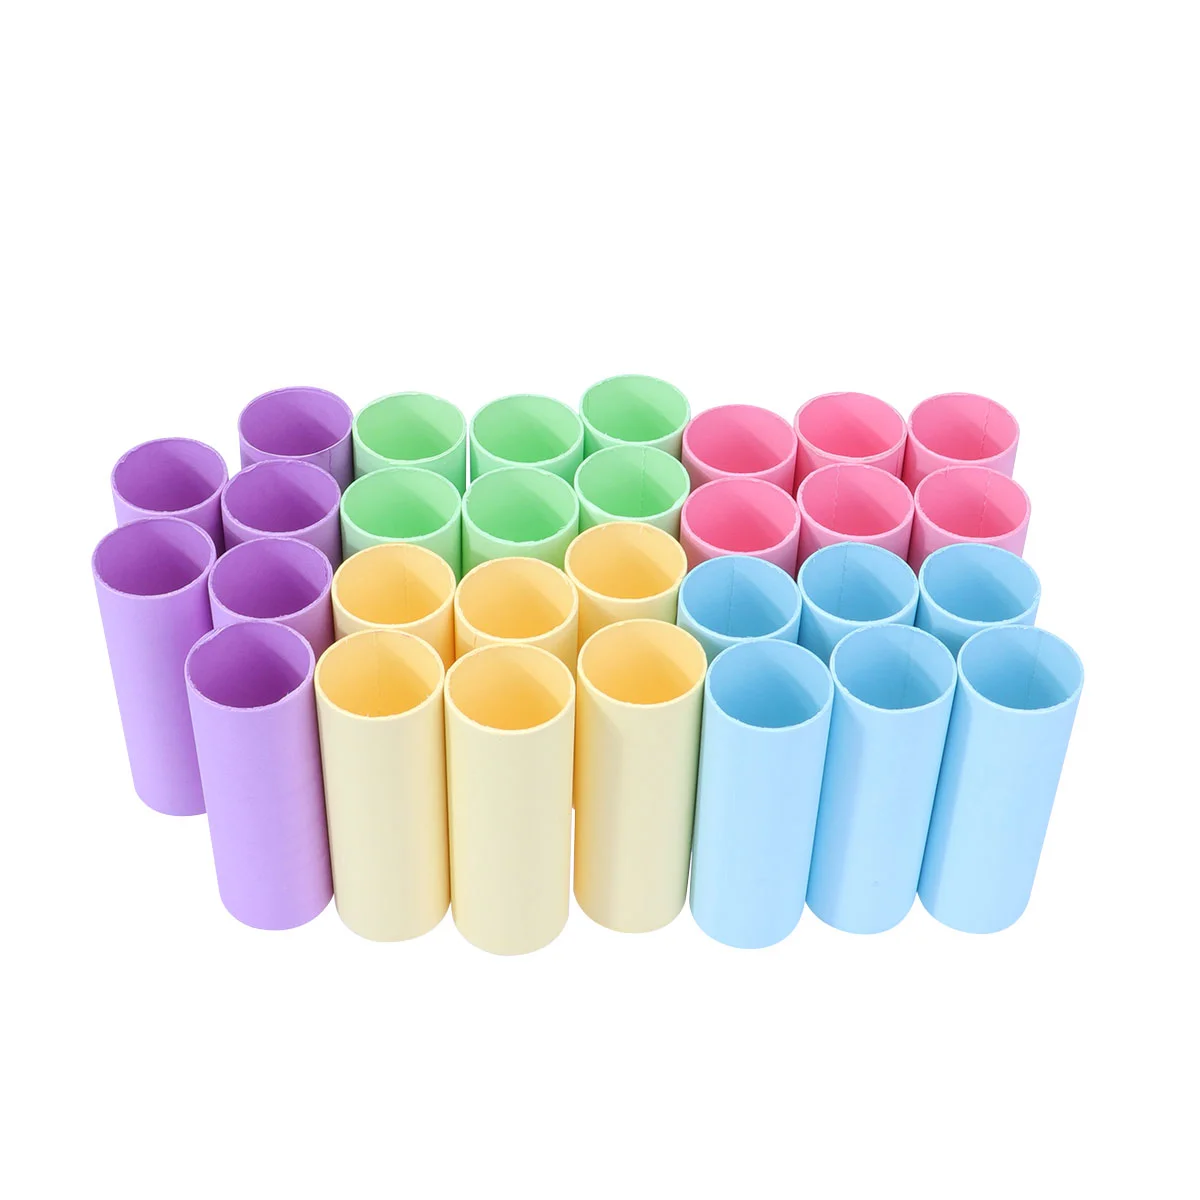 

Tubes Paper Cardboard Tube Roll Craft Kraft Crafts Mailing Toilet Rolls Round Diy Color Tissue Drawings Drawing Paintings Thick